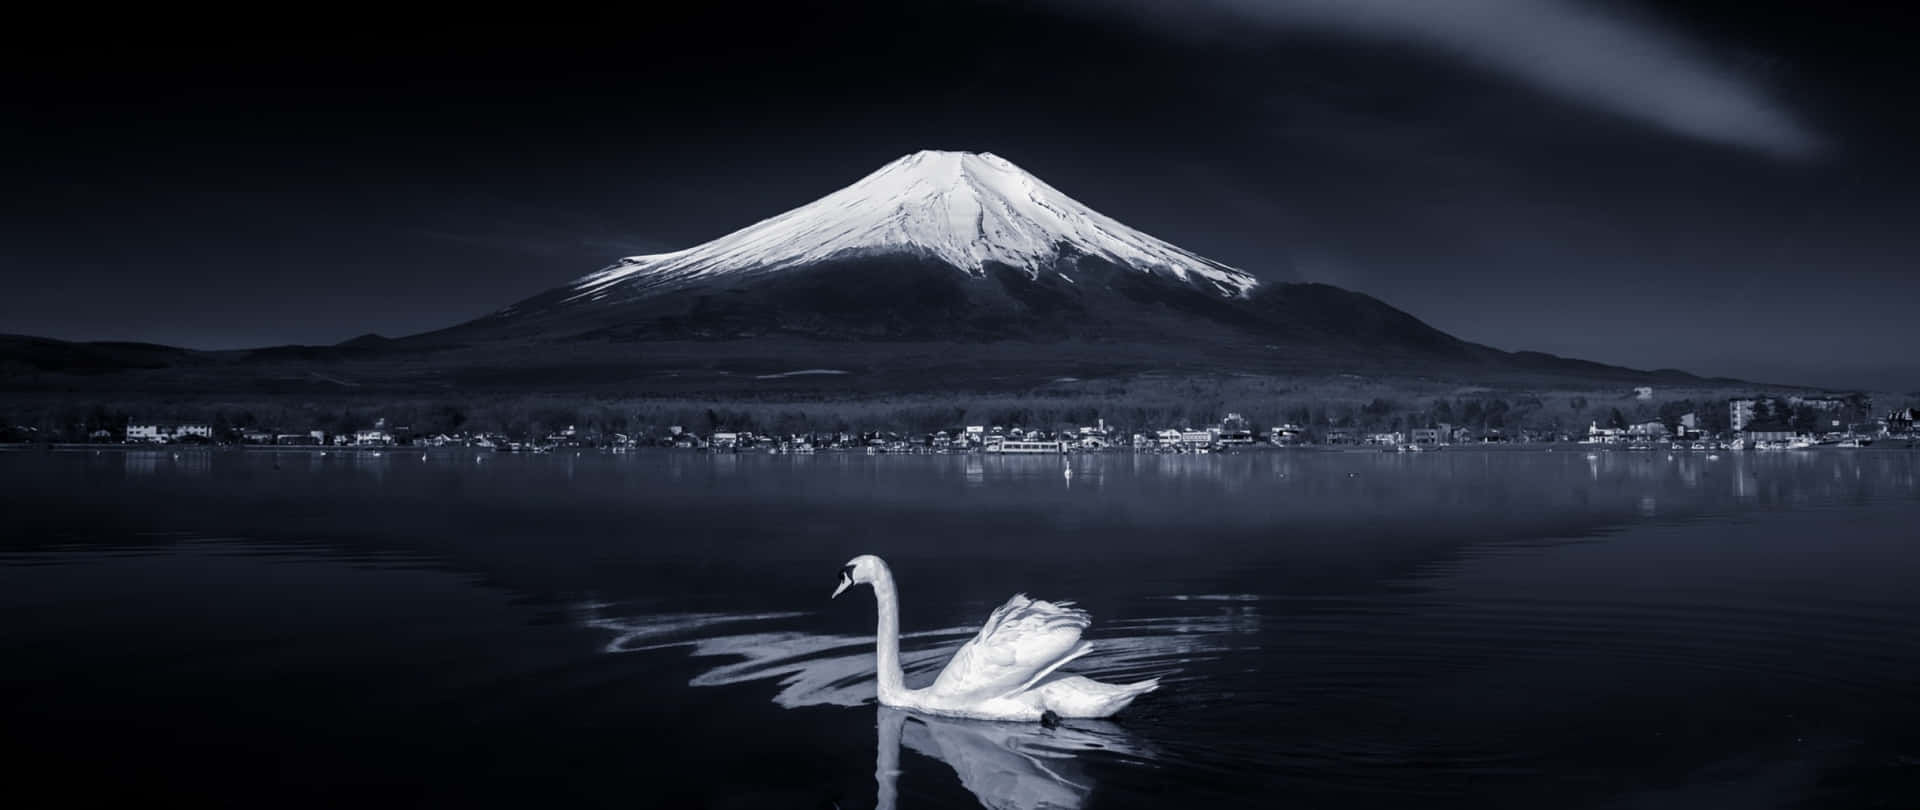 "The Magnificent Black and White Architecture of Japan" Wallpaper